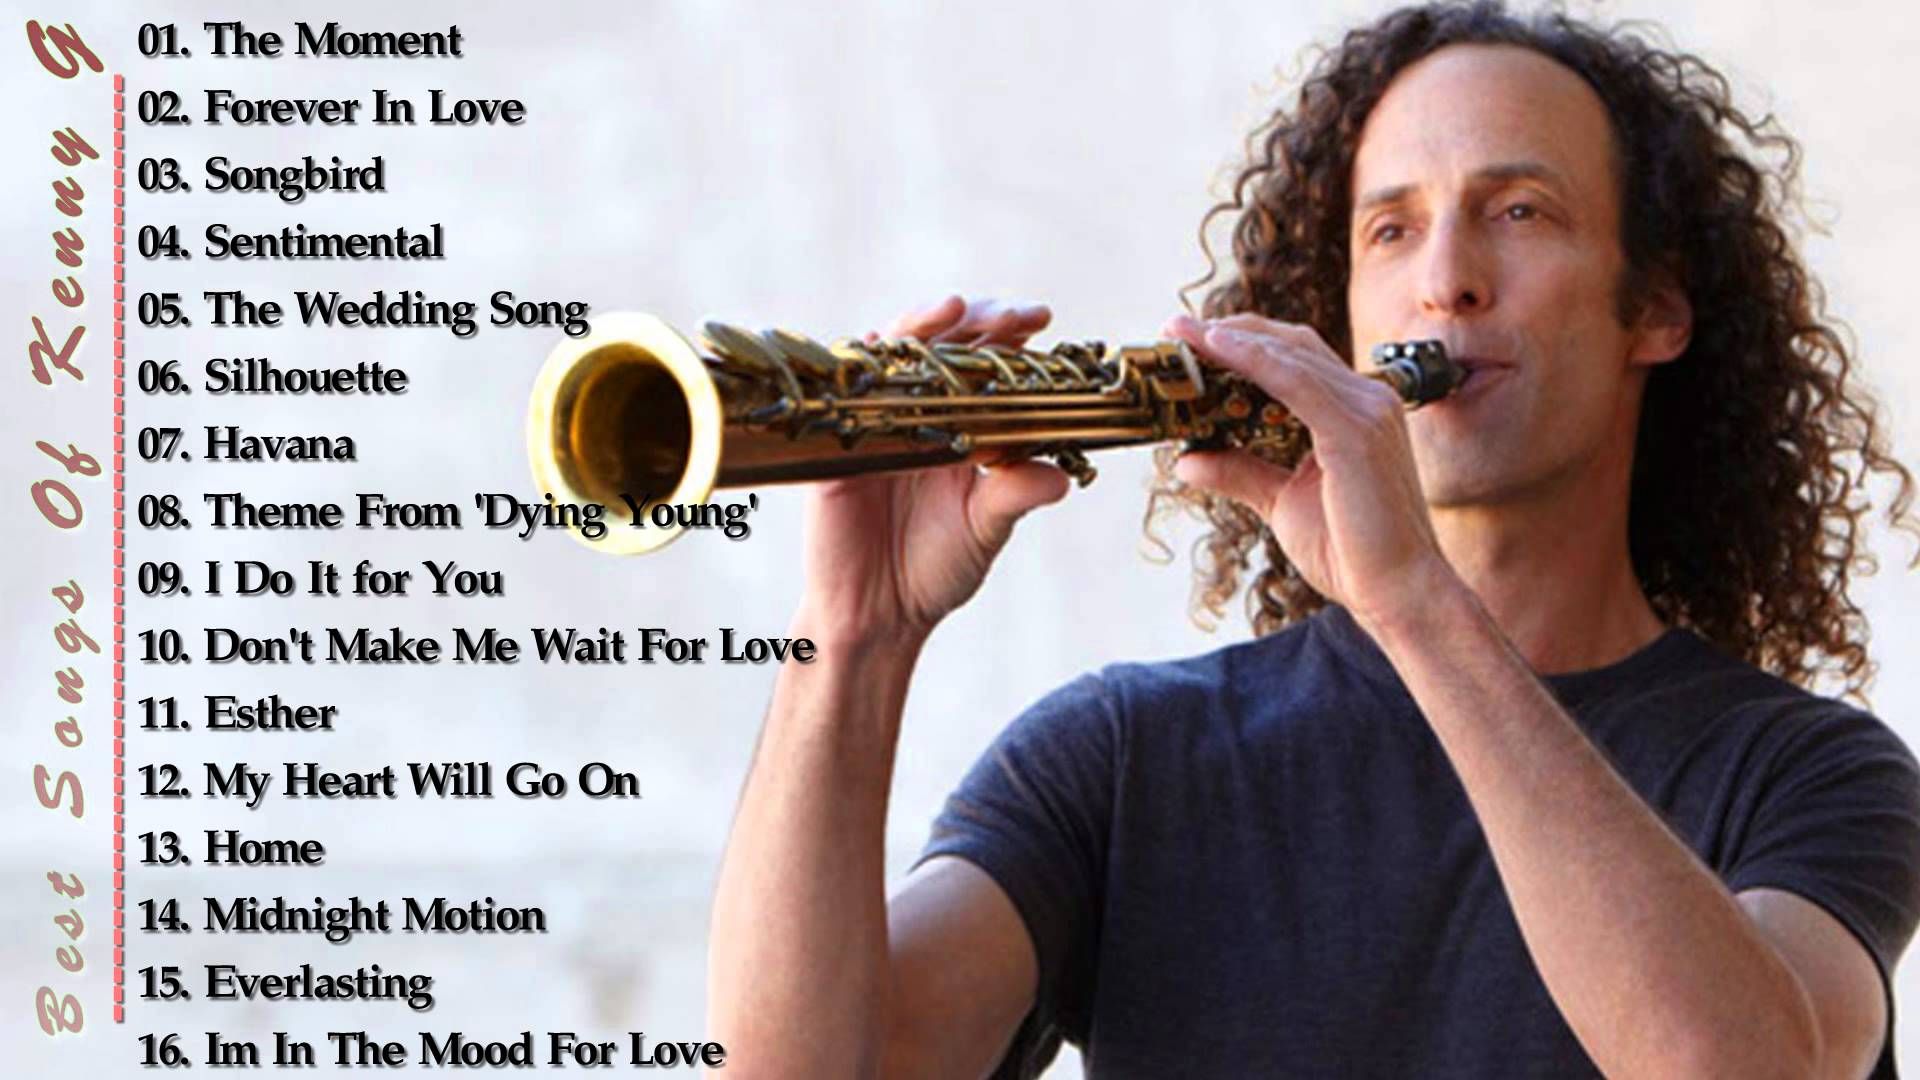 kenny g best hits